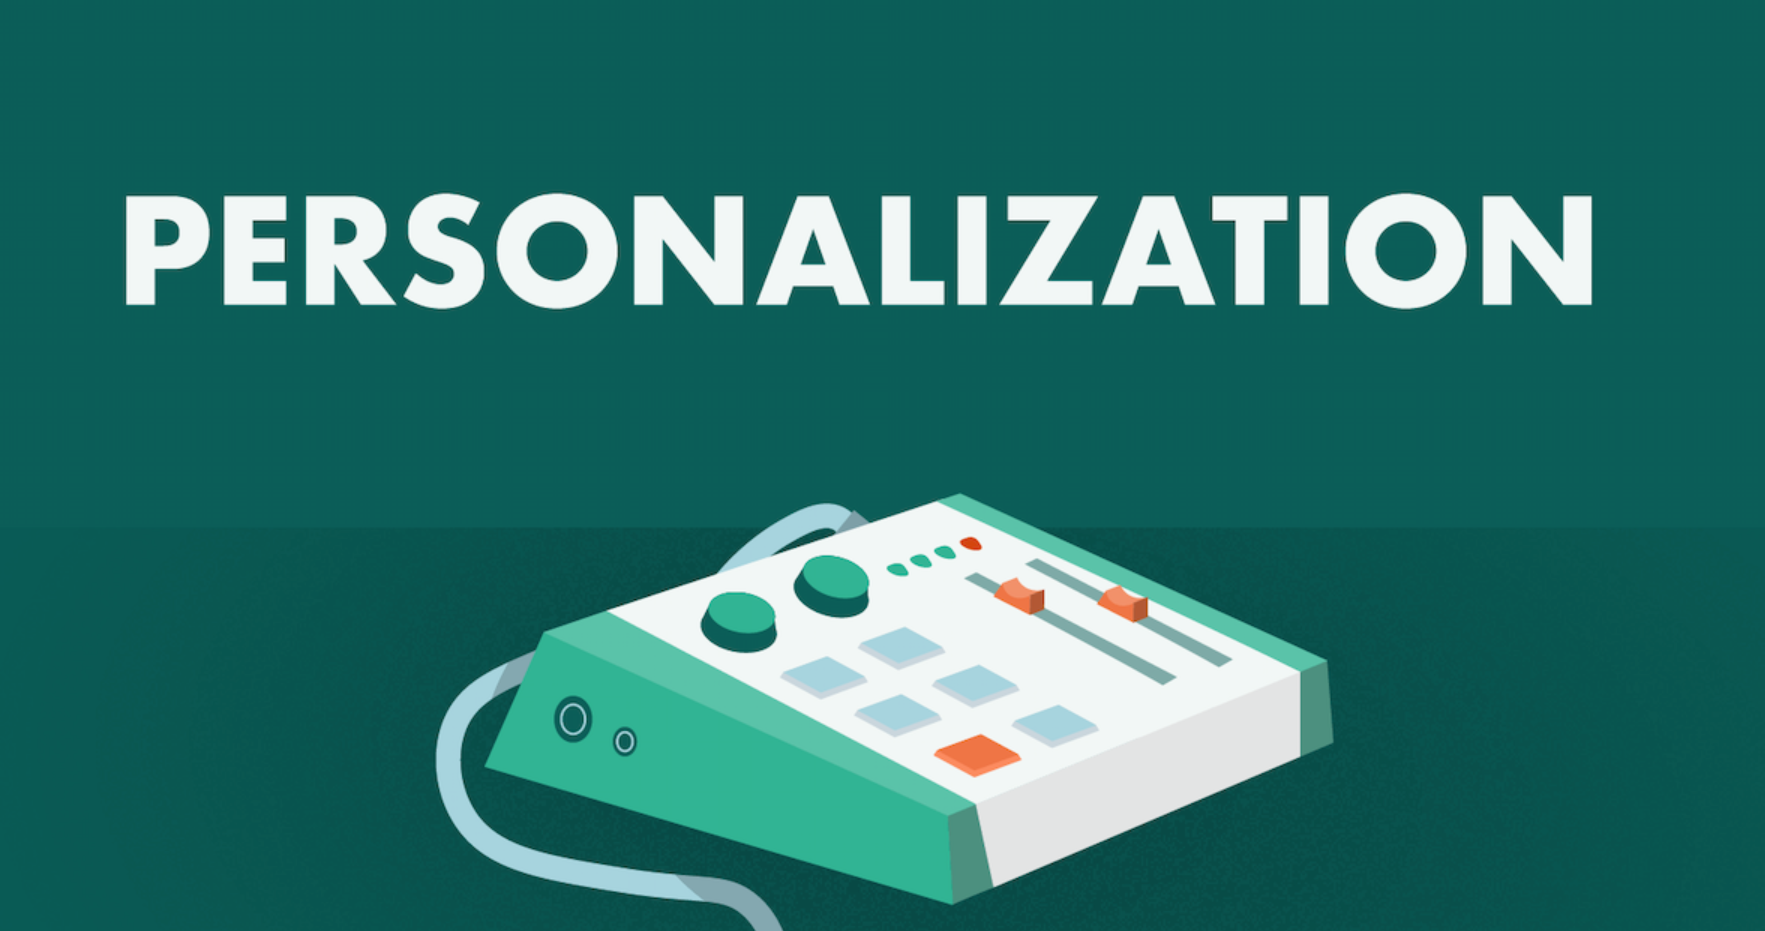 5 Examples of Personalization in Marketing